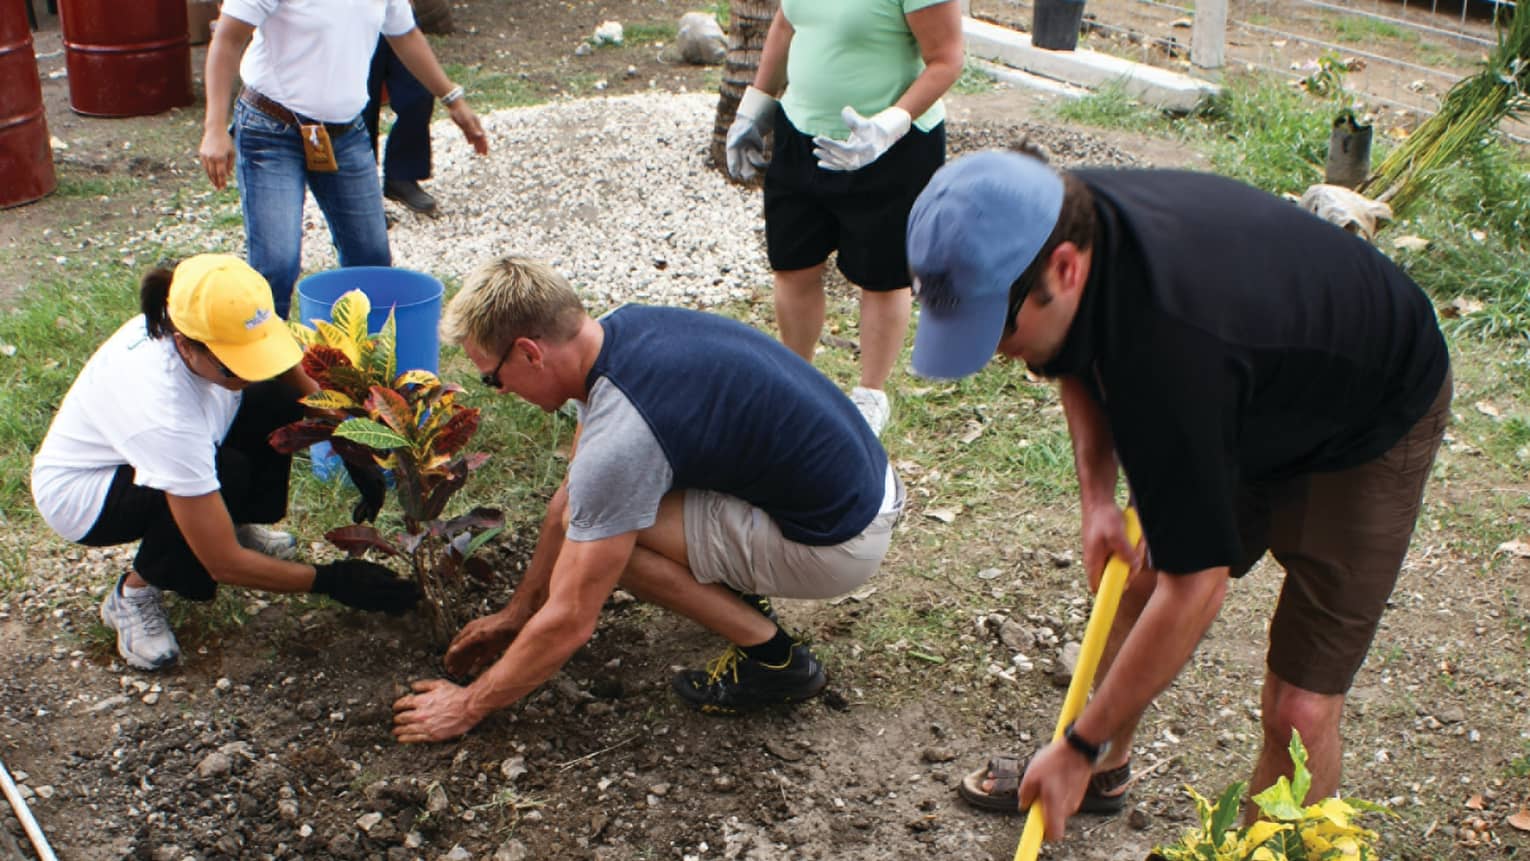 Group of adults wearing hats, garden gloves help plant trees and tropical plants